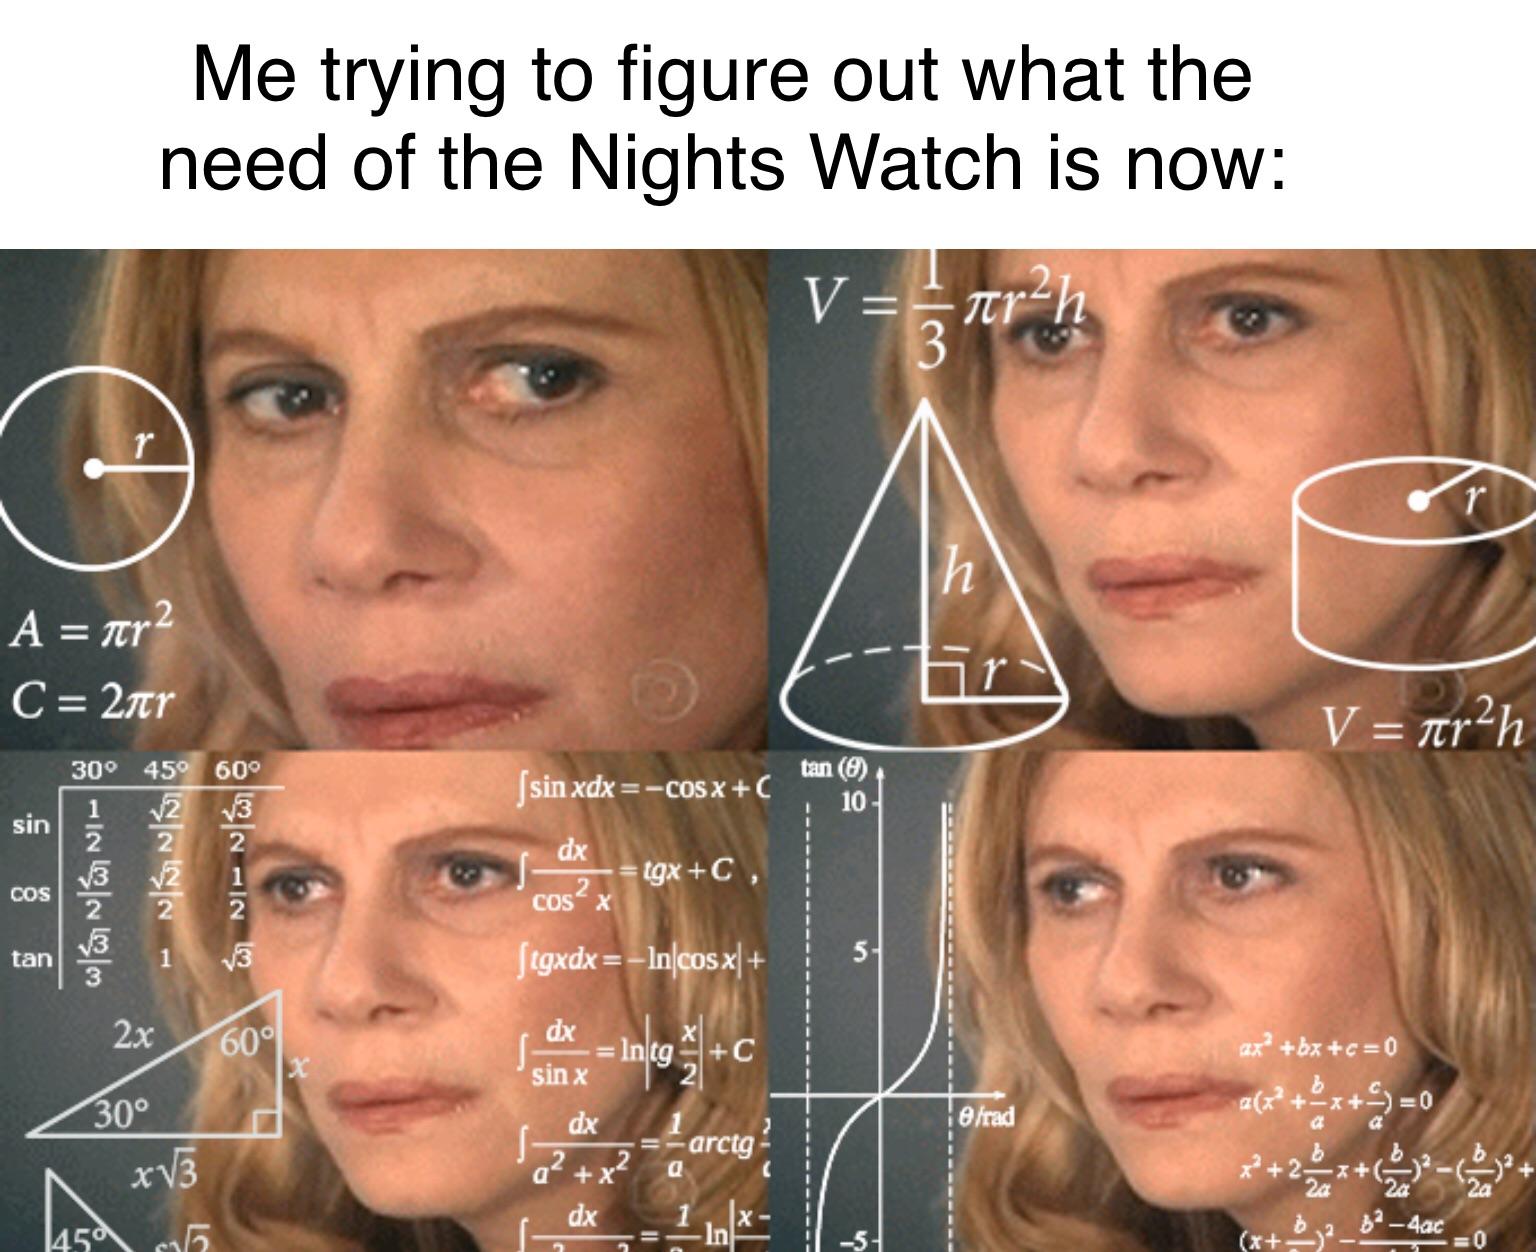 game of thrones final episode meme - me trying to work out meme - Me trying to figure out what the need of the Nights Watch is now A nr 2 C 2tr V Trah 300 450 600 tan 0 sin xdx Cos X C I Nsb dx Sin Finl sa tgxC, lves Cos tgxdx Incosx dx k Into c at? bxc0